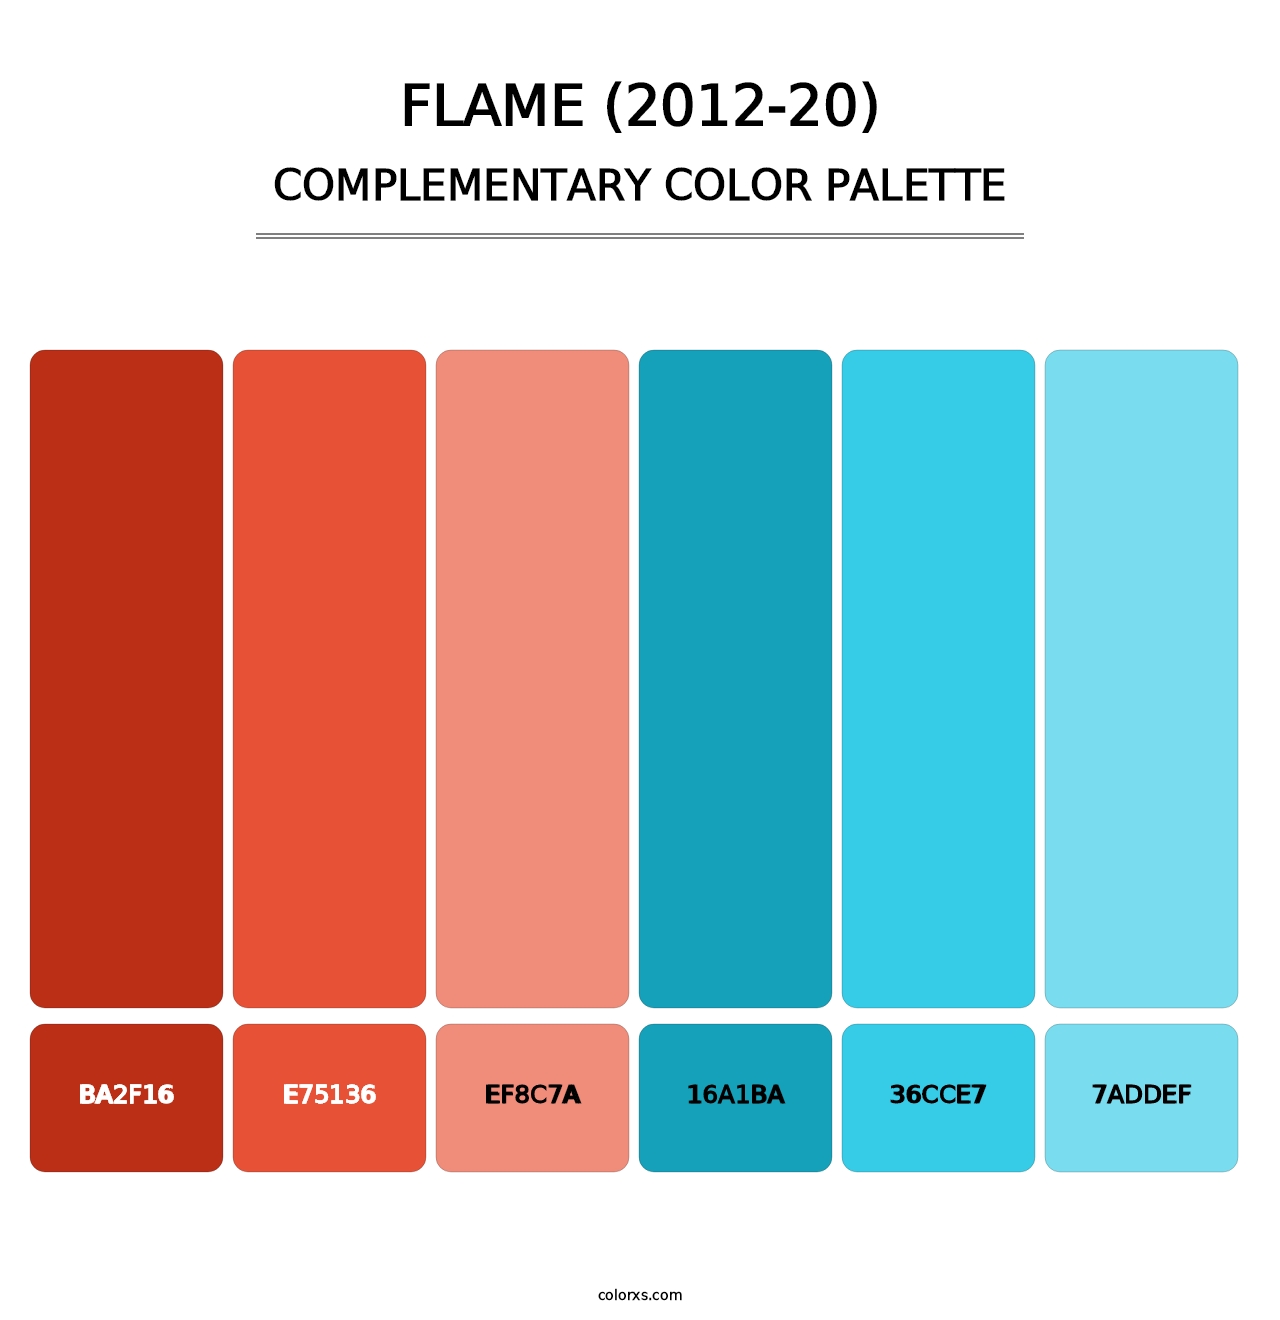 Flame (2012-20) - Complementary Color Palette